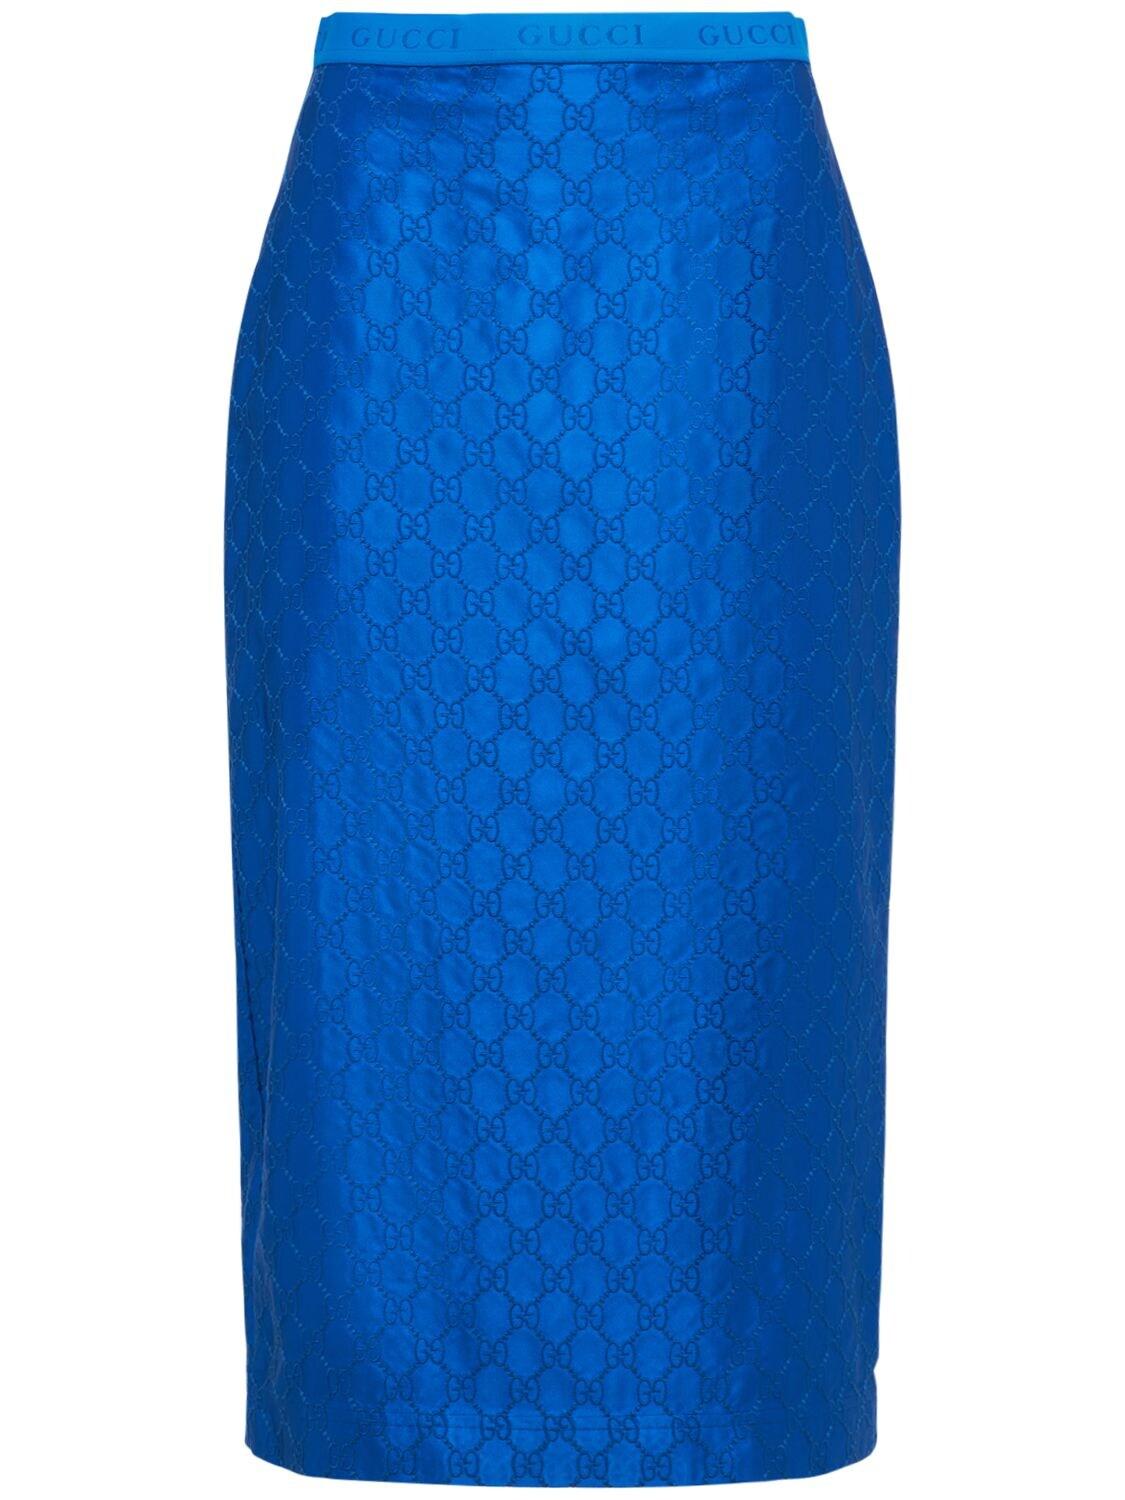 Gucci Embroidered Silk Logo Pencil Midi Skirt in Blue | Lyst UK